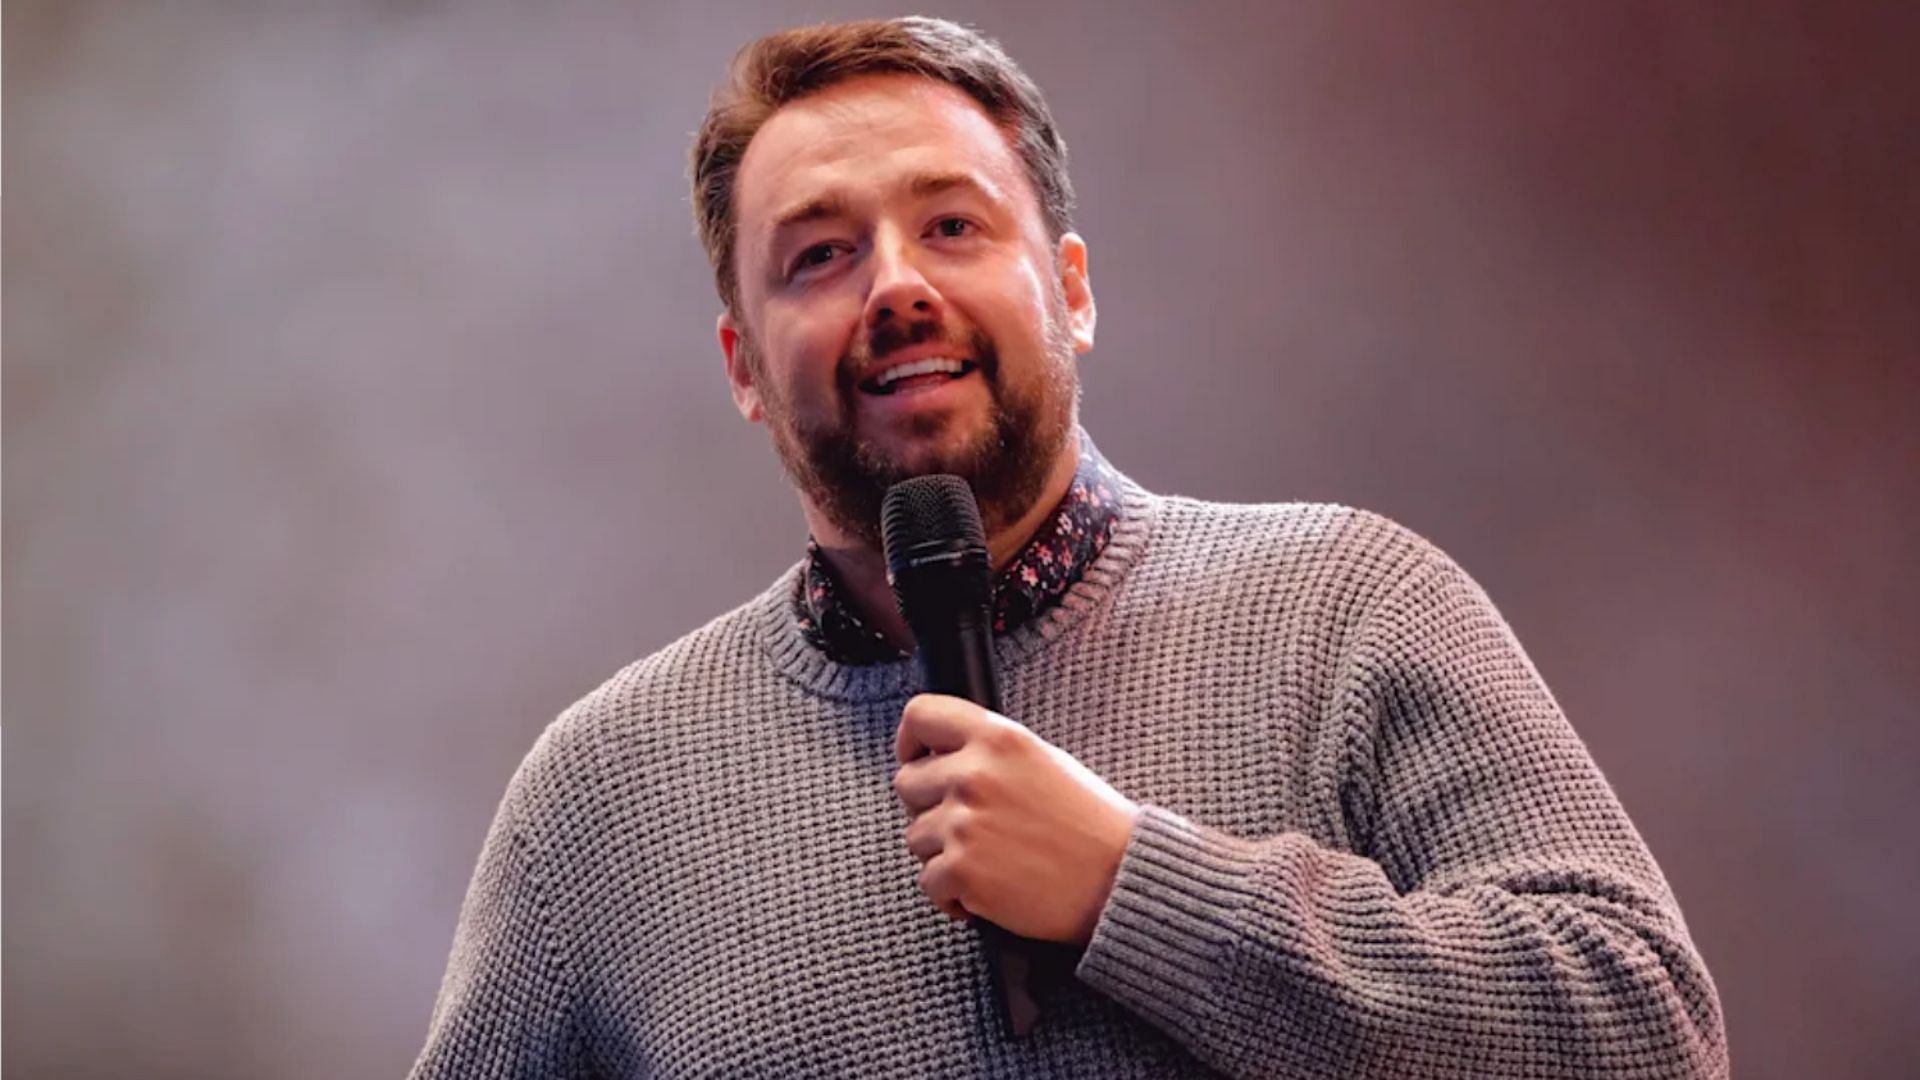 Jason Manford will hit the road in 2023. (Image via Getty)